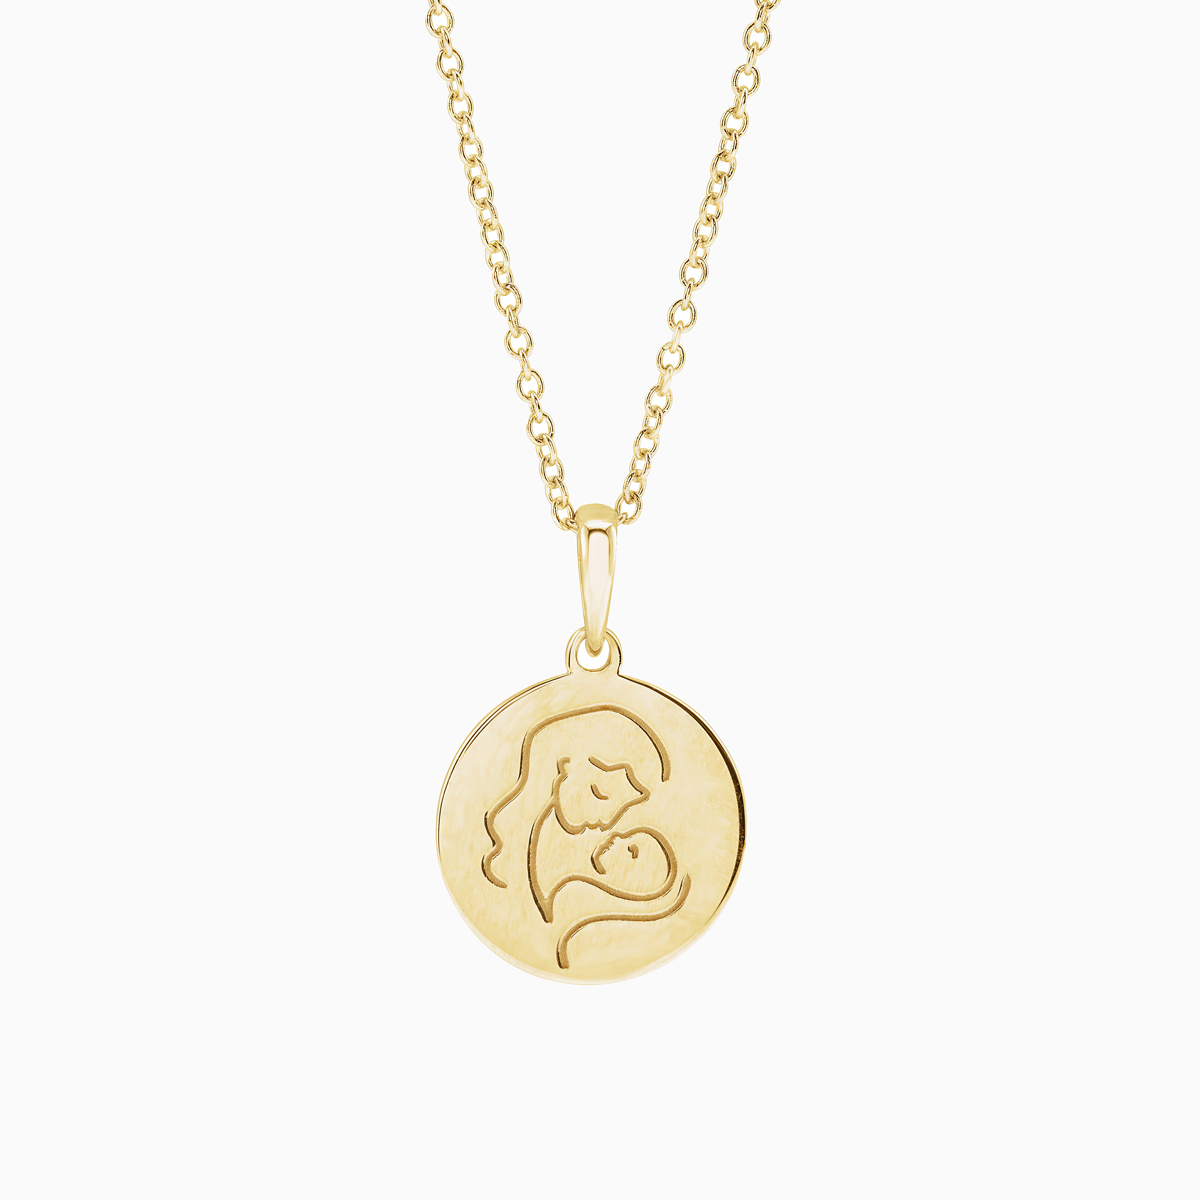 Mom and Baby Pendant with chain, 14k Gold